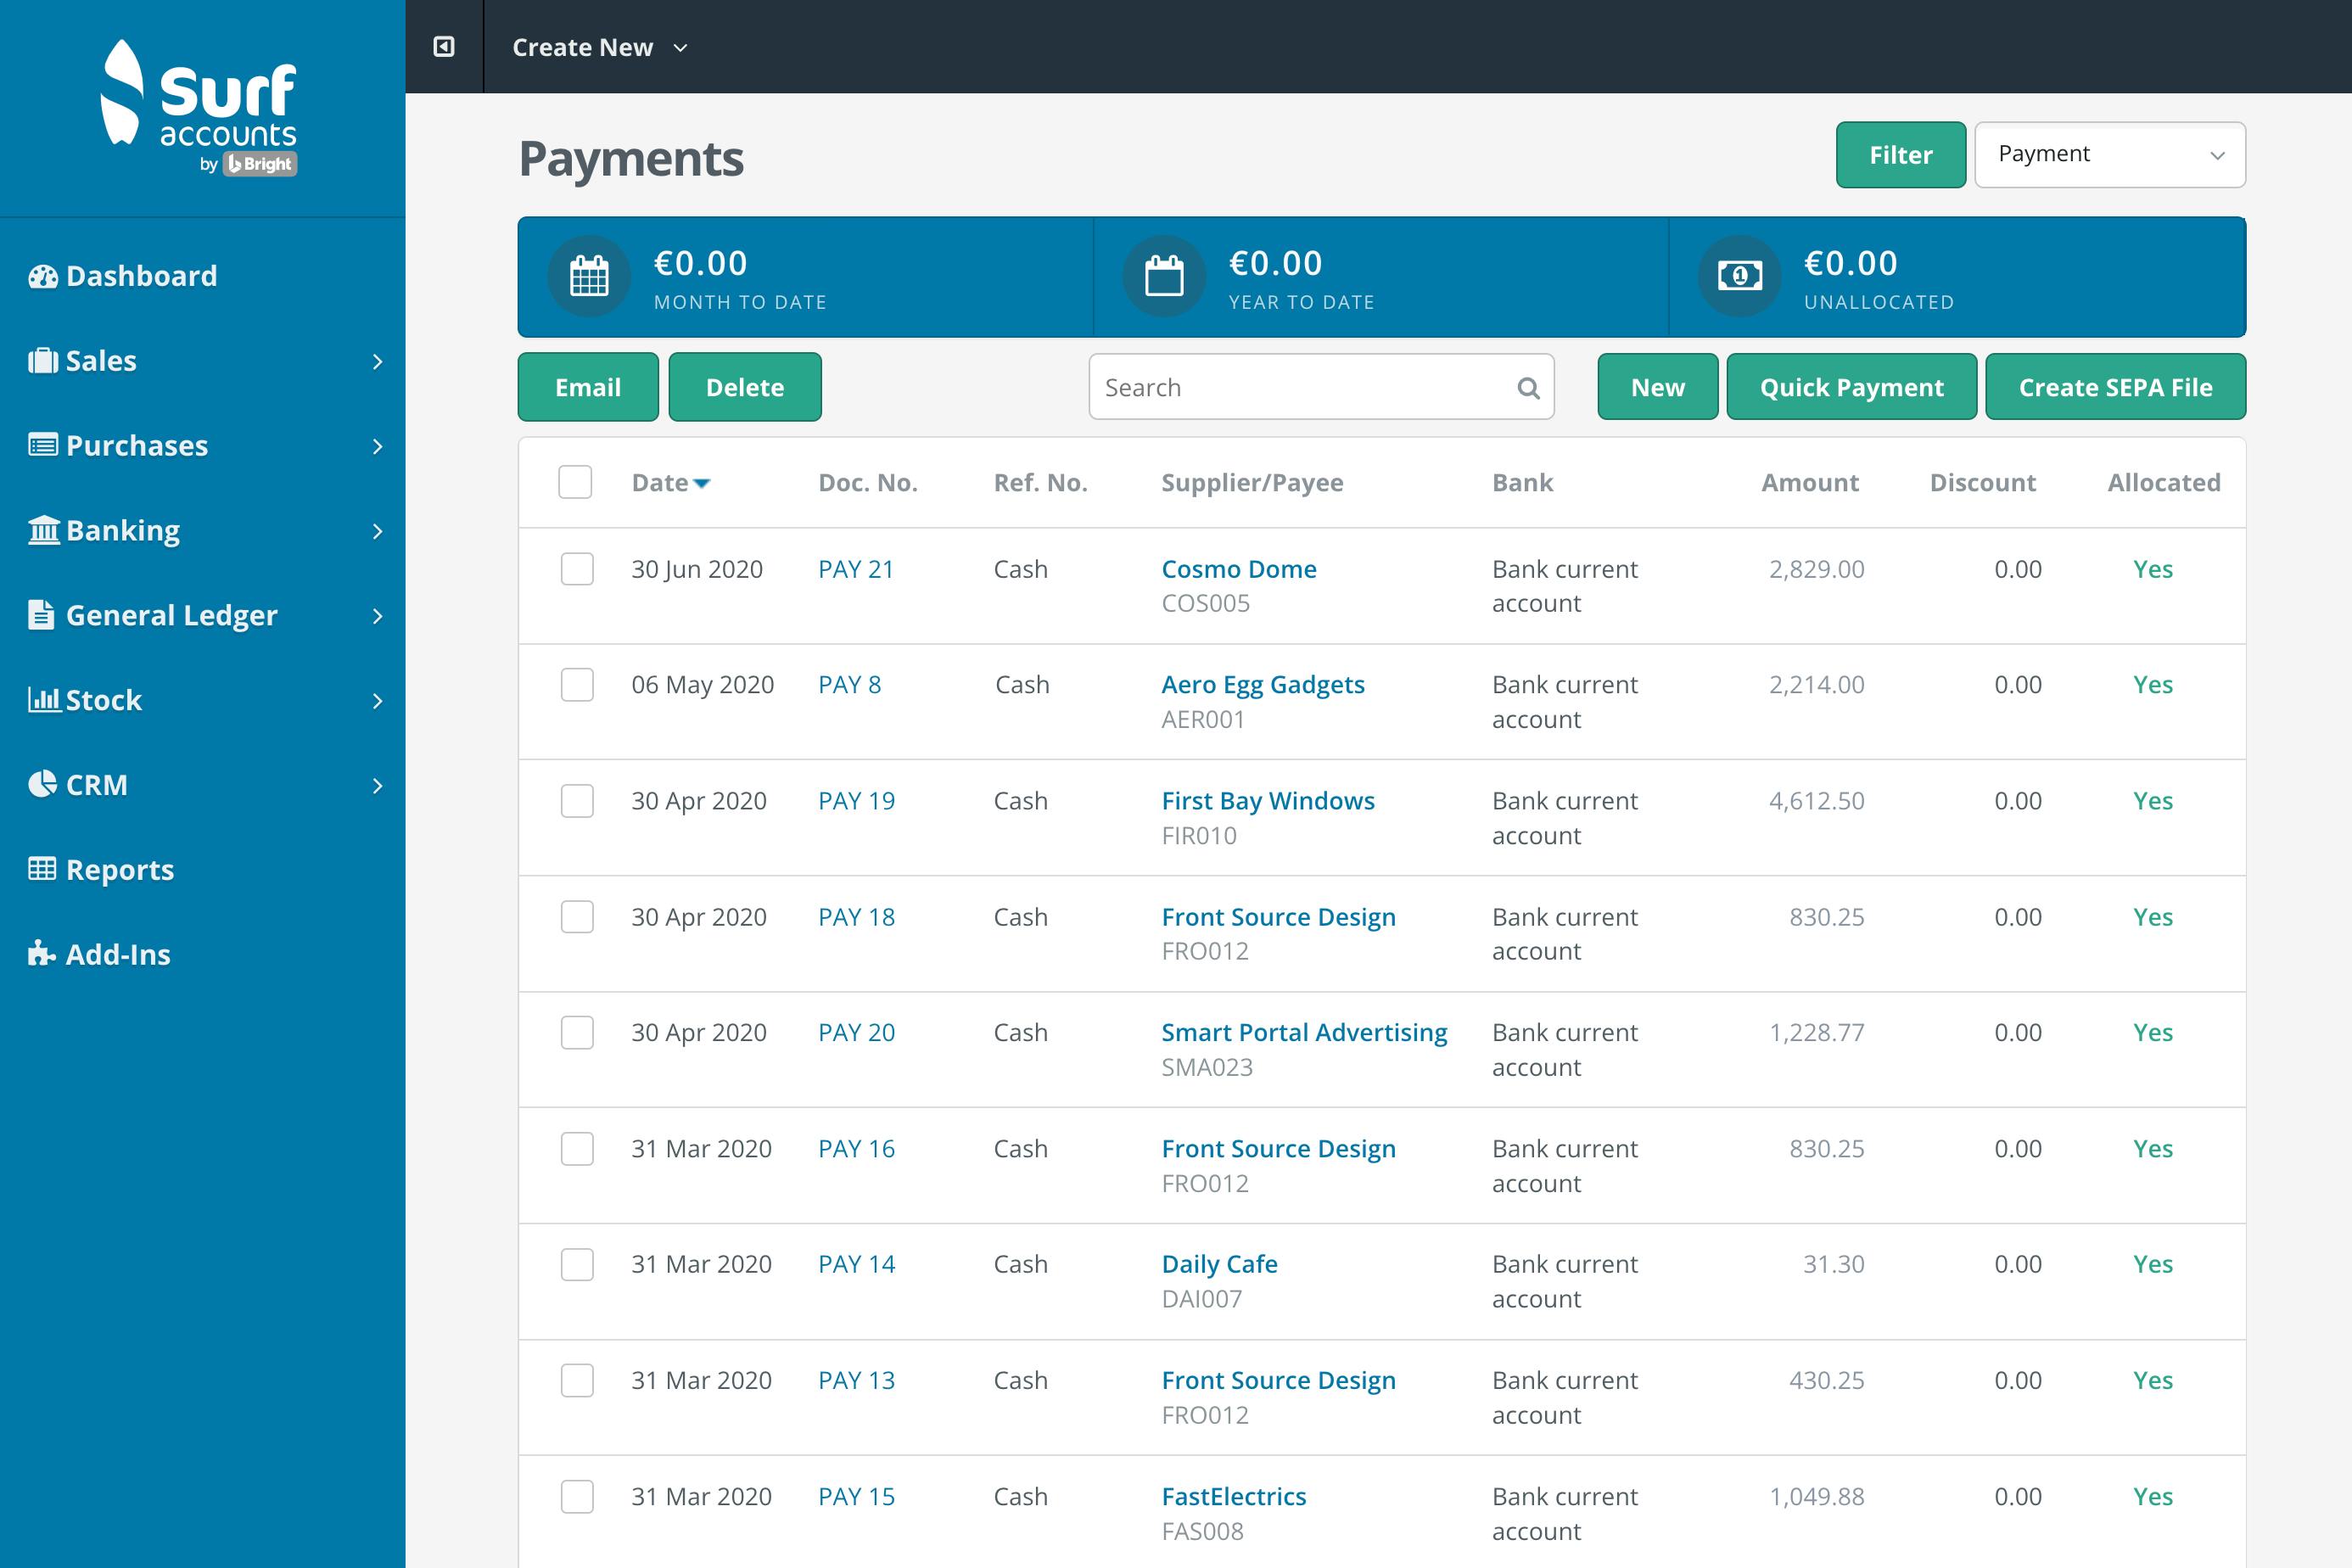 Surf Accounts Streamline Payments